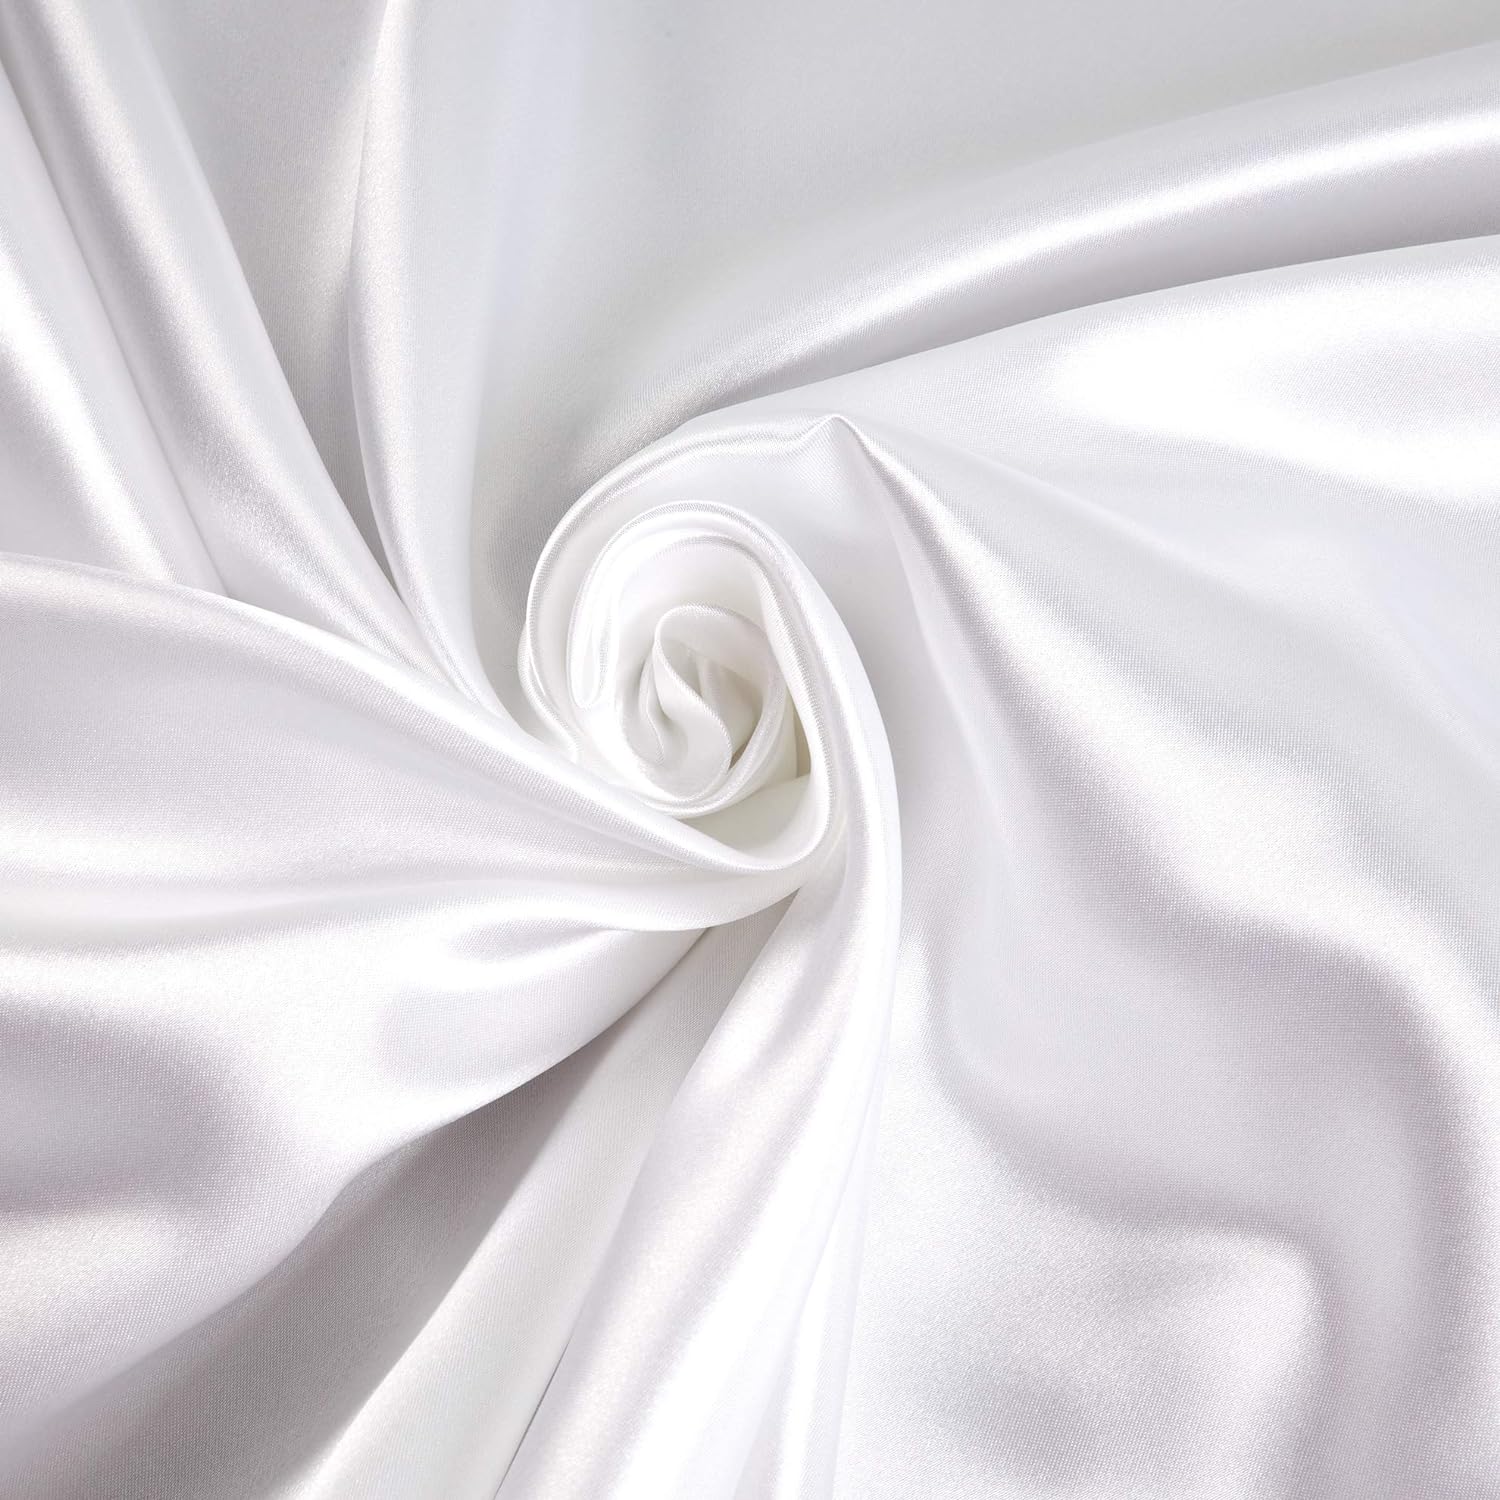 White Bandanas - Solid Color 27" X 27" (12 Pack) - Click Image to Close